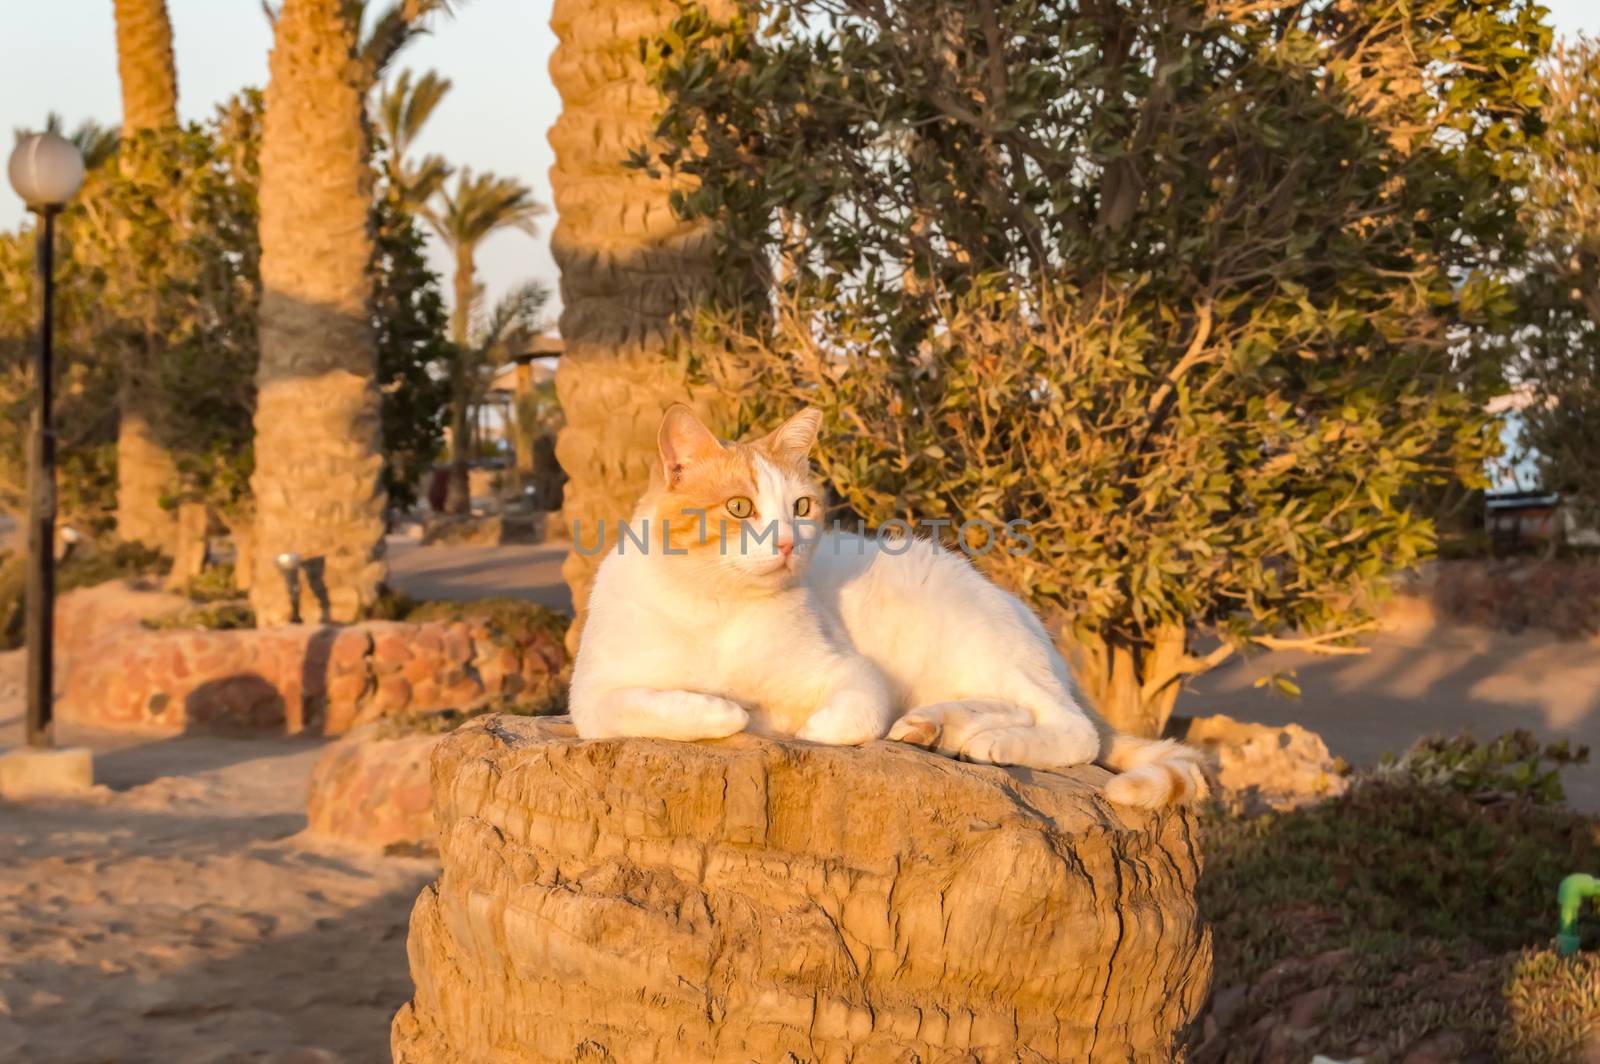 White and red cat sleeping on the trunk of a saw palm tree in the city of Hurghada